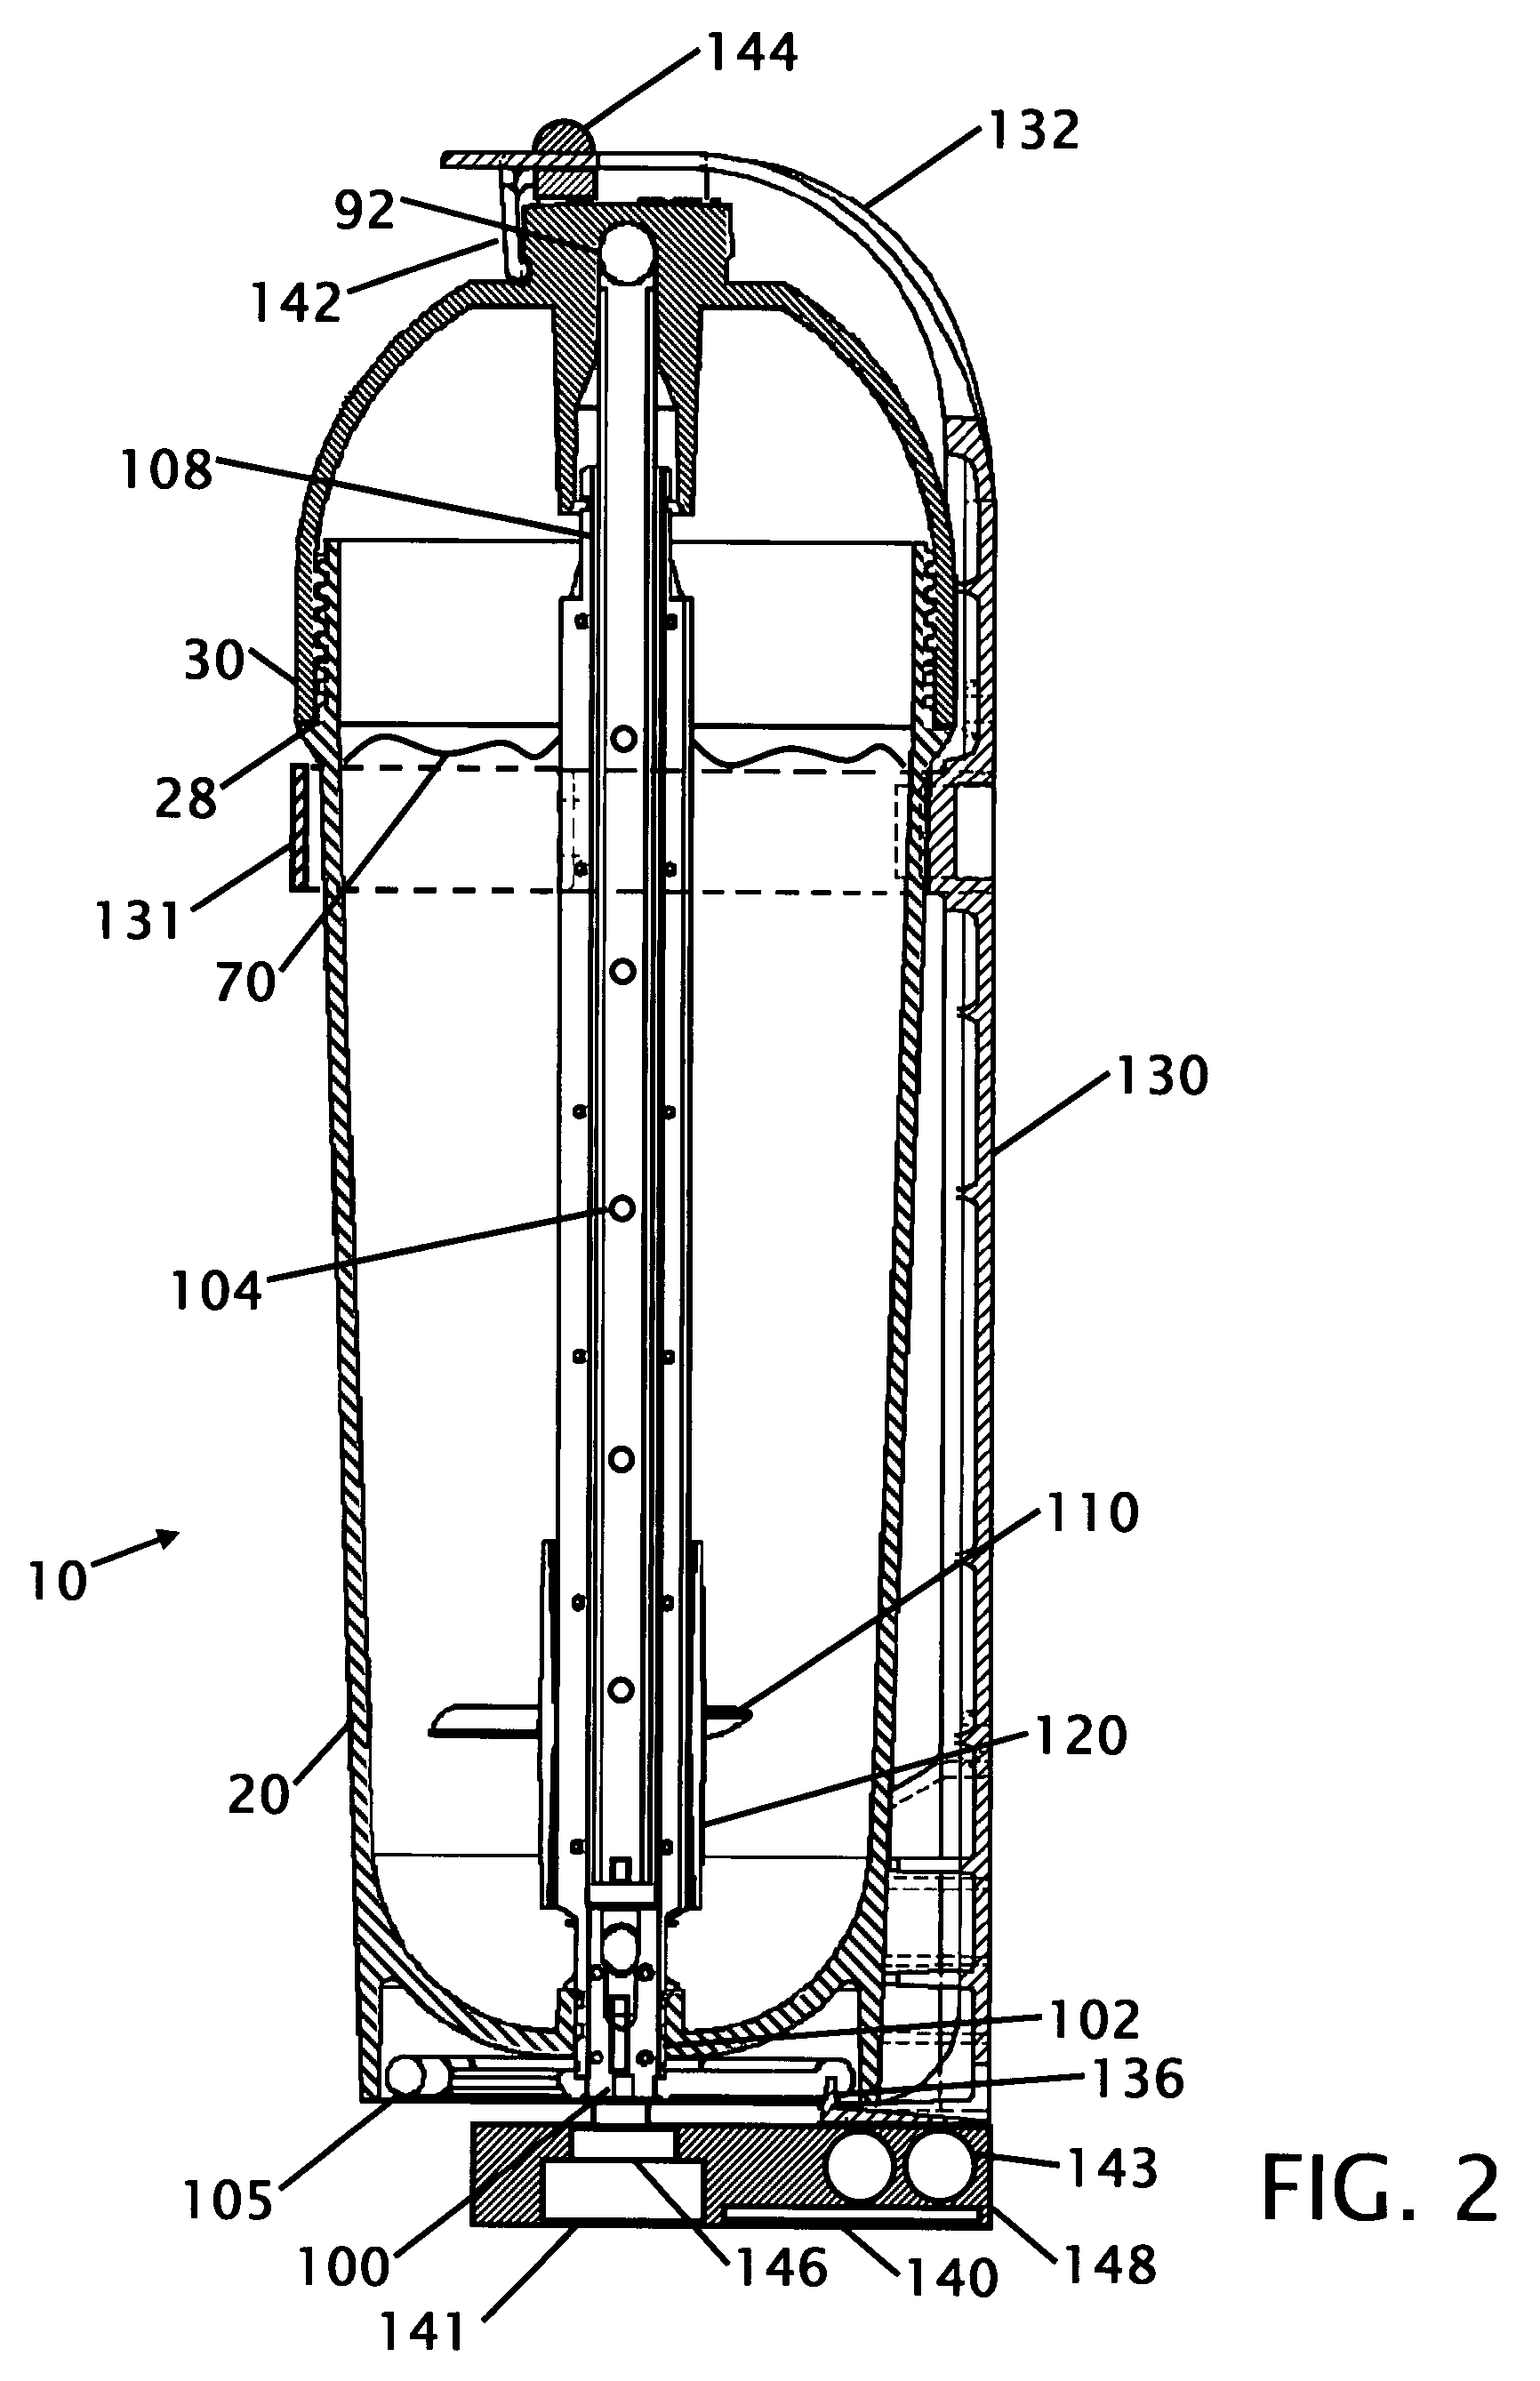 Self servicing fire extinguisher with wall mounting bracket and powder fluffing apparatus